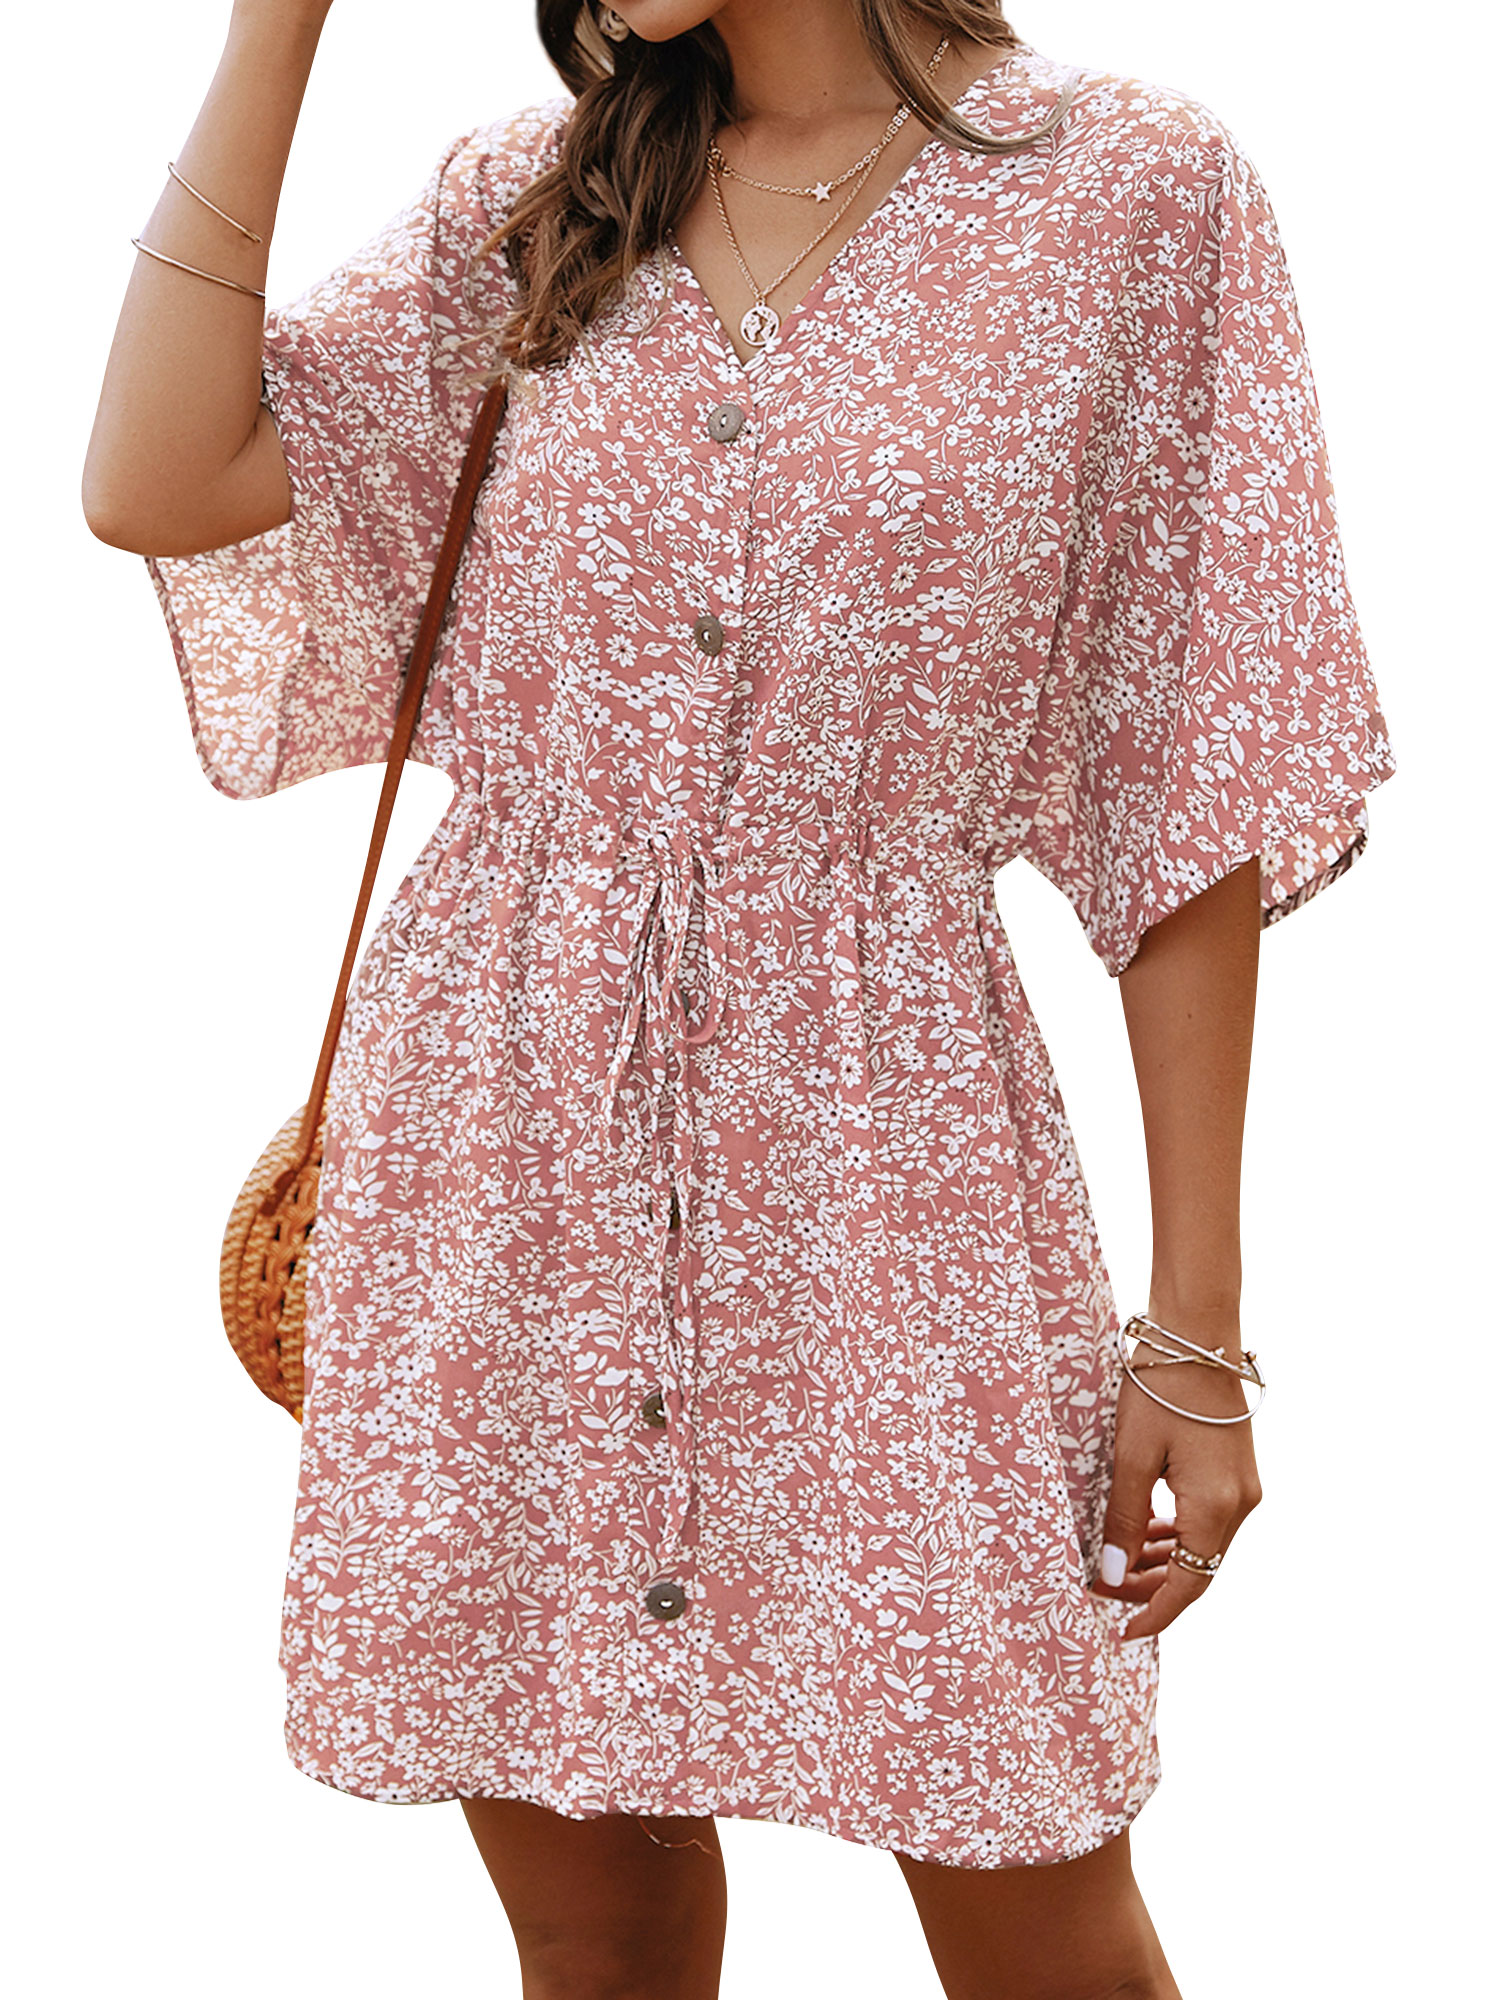 ZXZY Women Floral Printed Buttons Tie Waist Short Sleeves Mini Dress - image 3 of 12